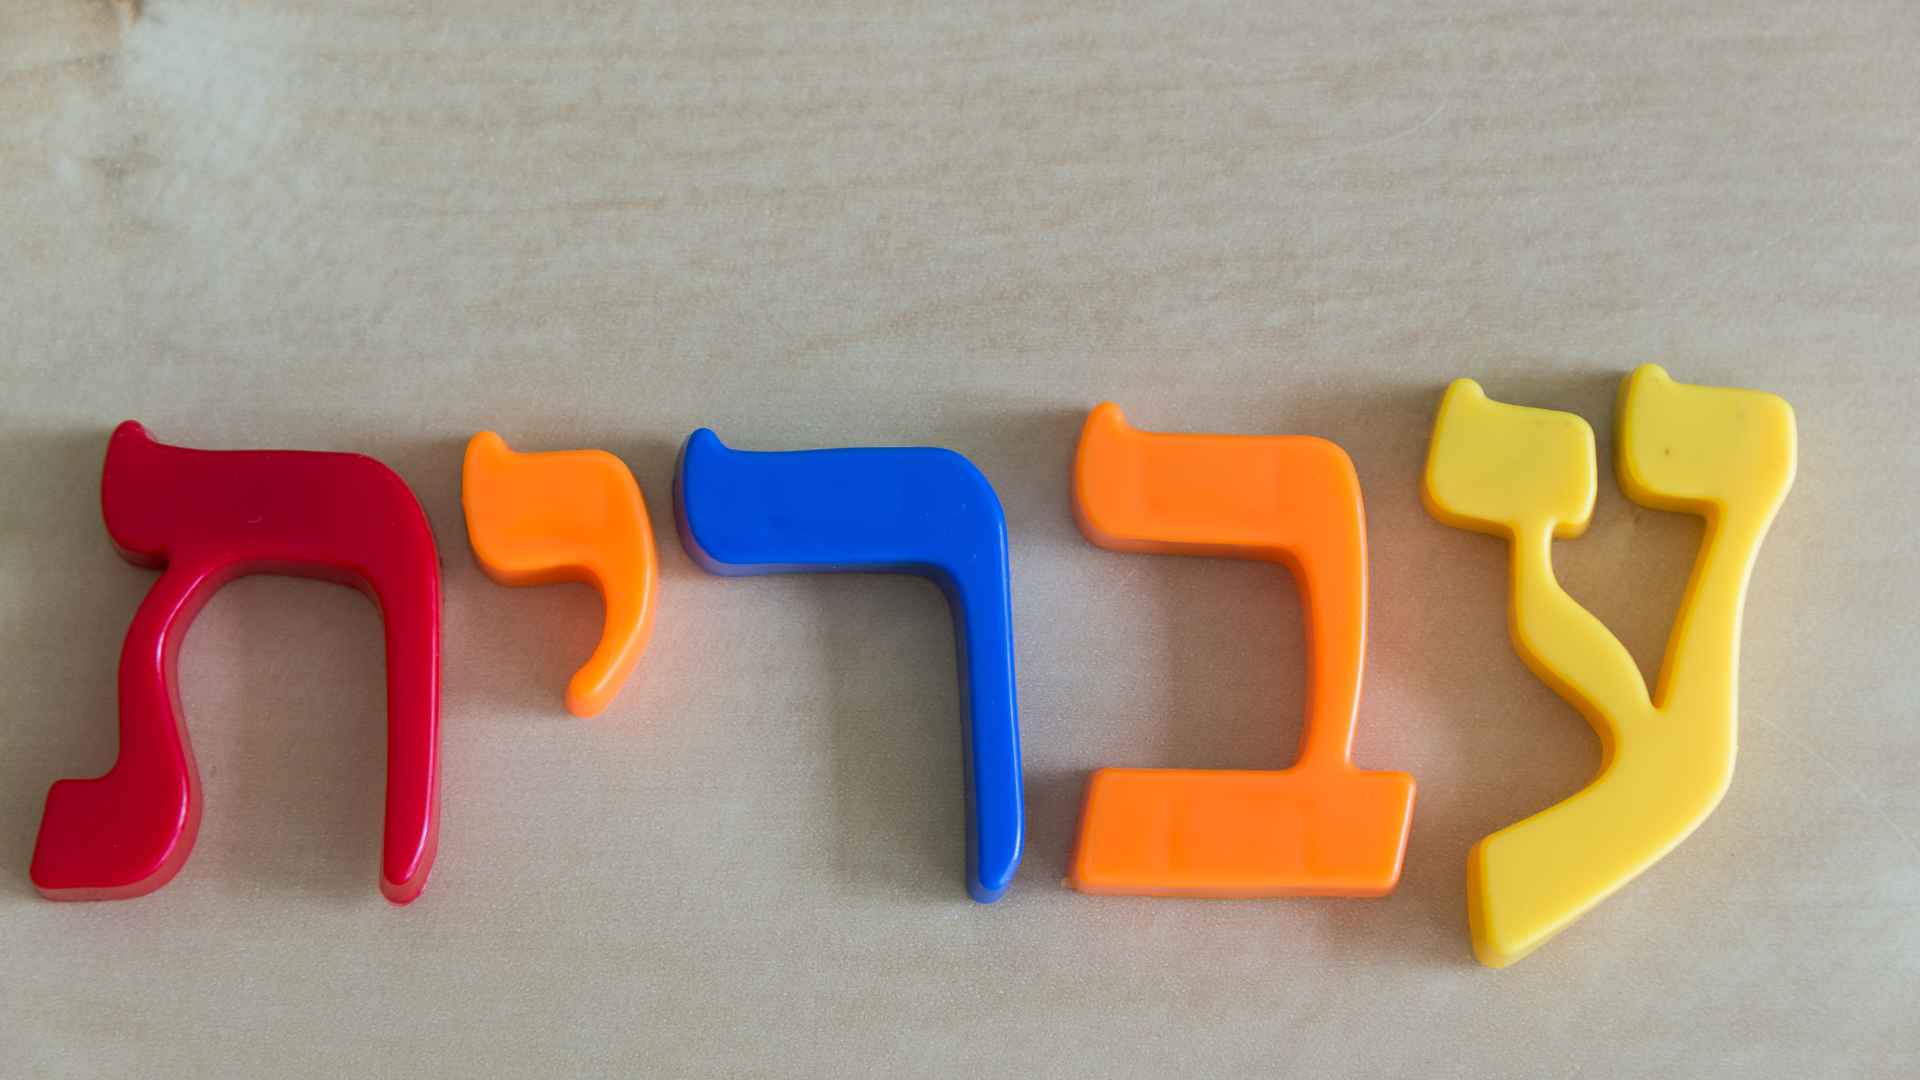 learn to read hebrew